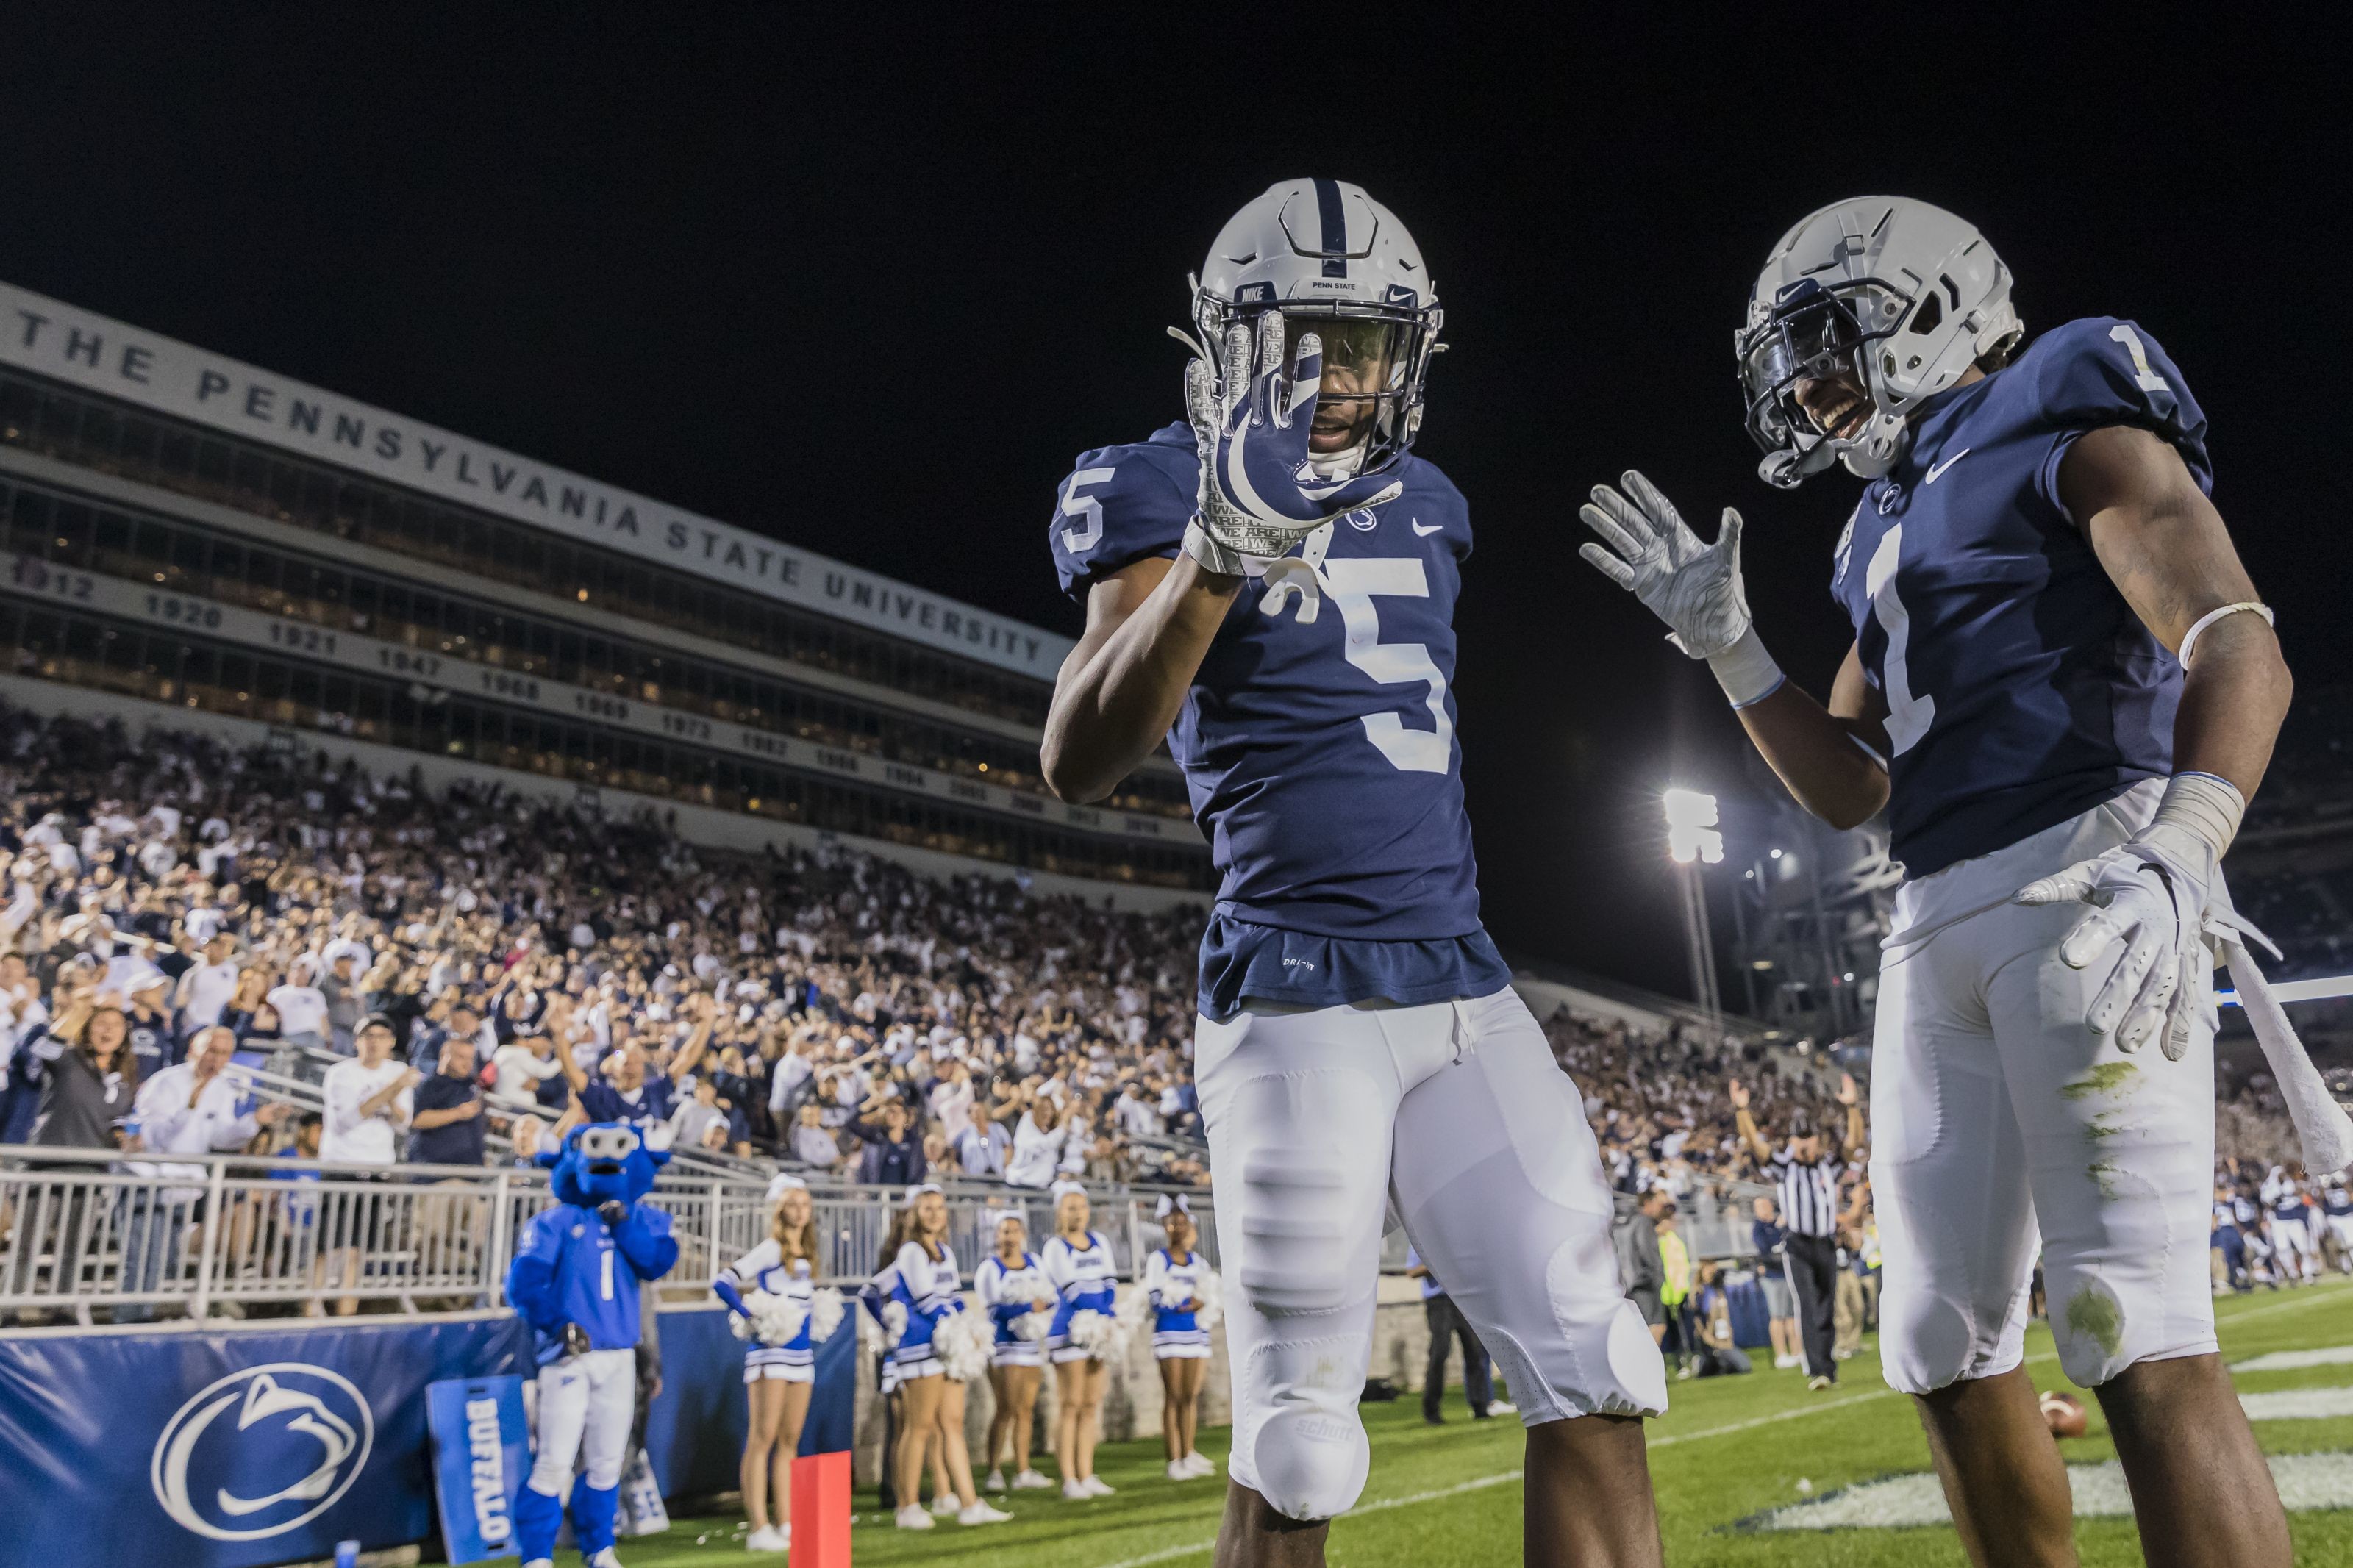 Alternate uniforms giving Penn State football players a mental boost